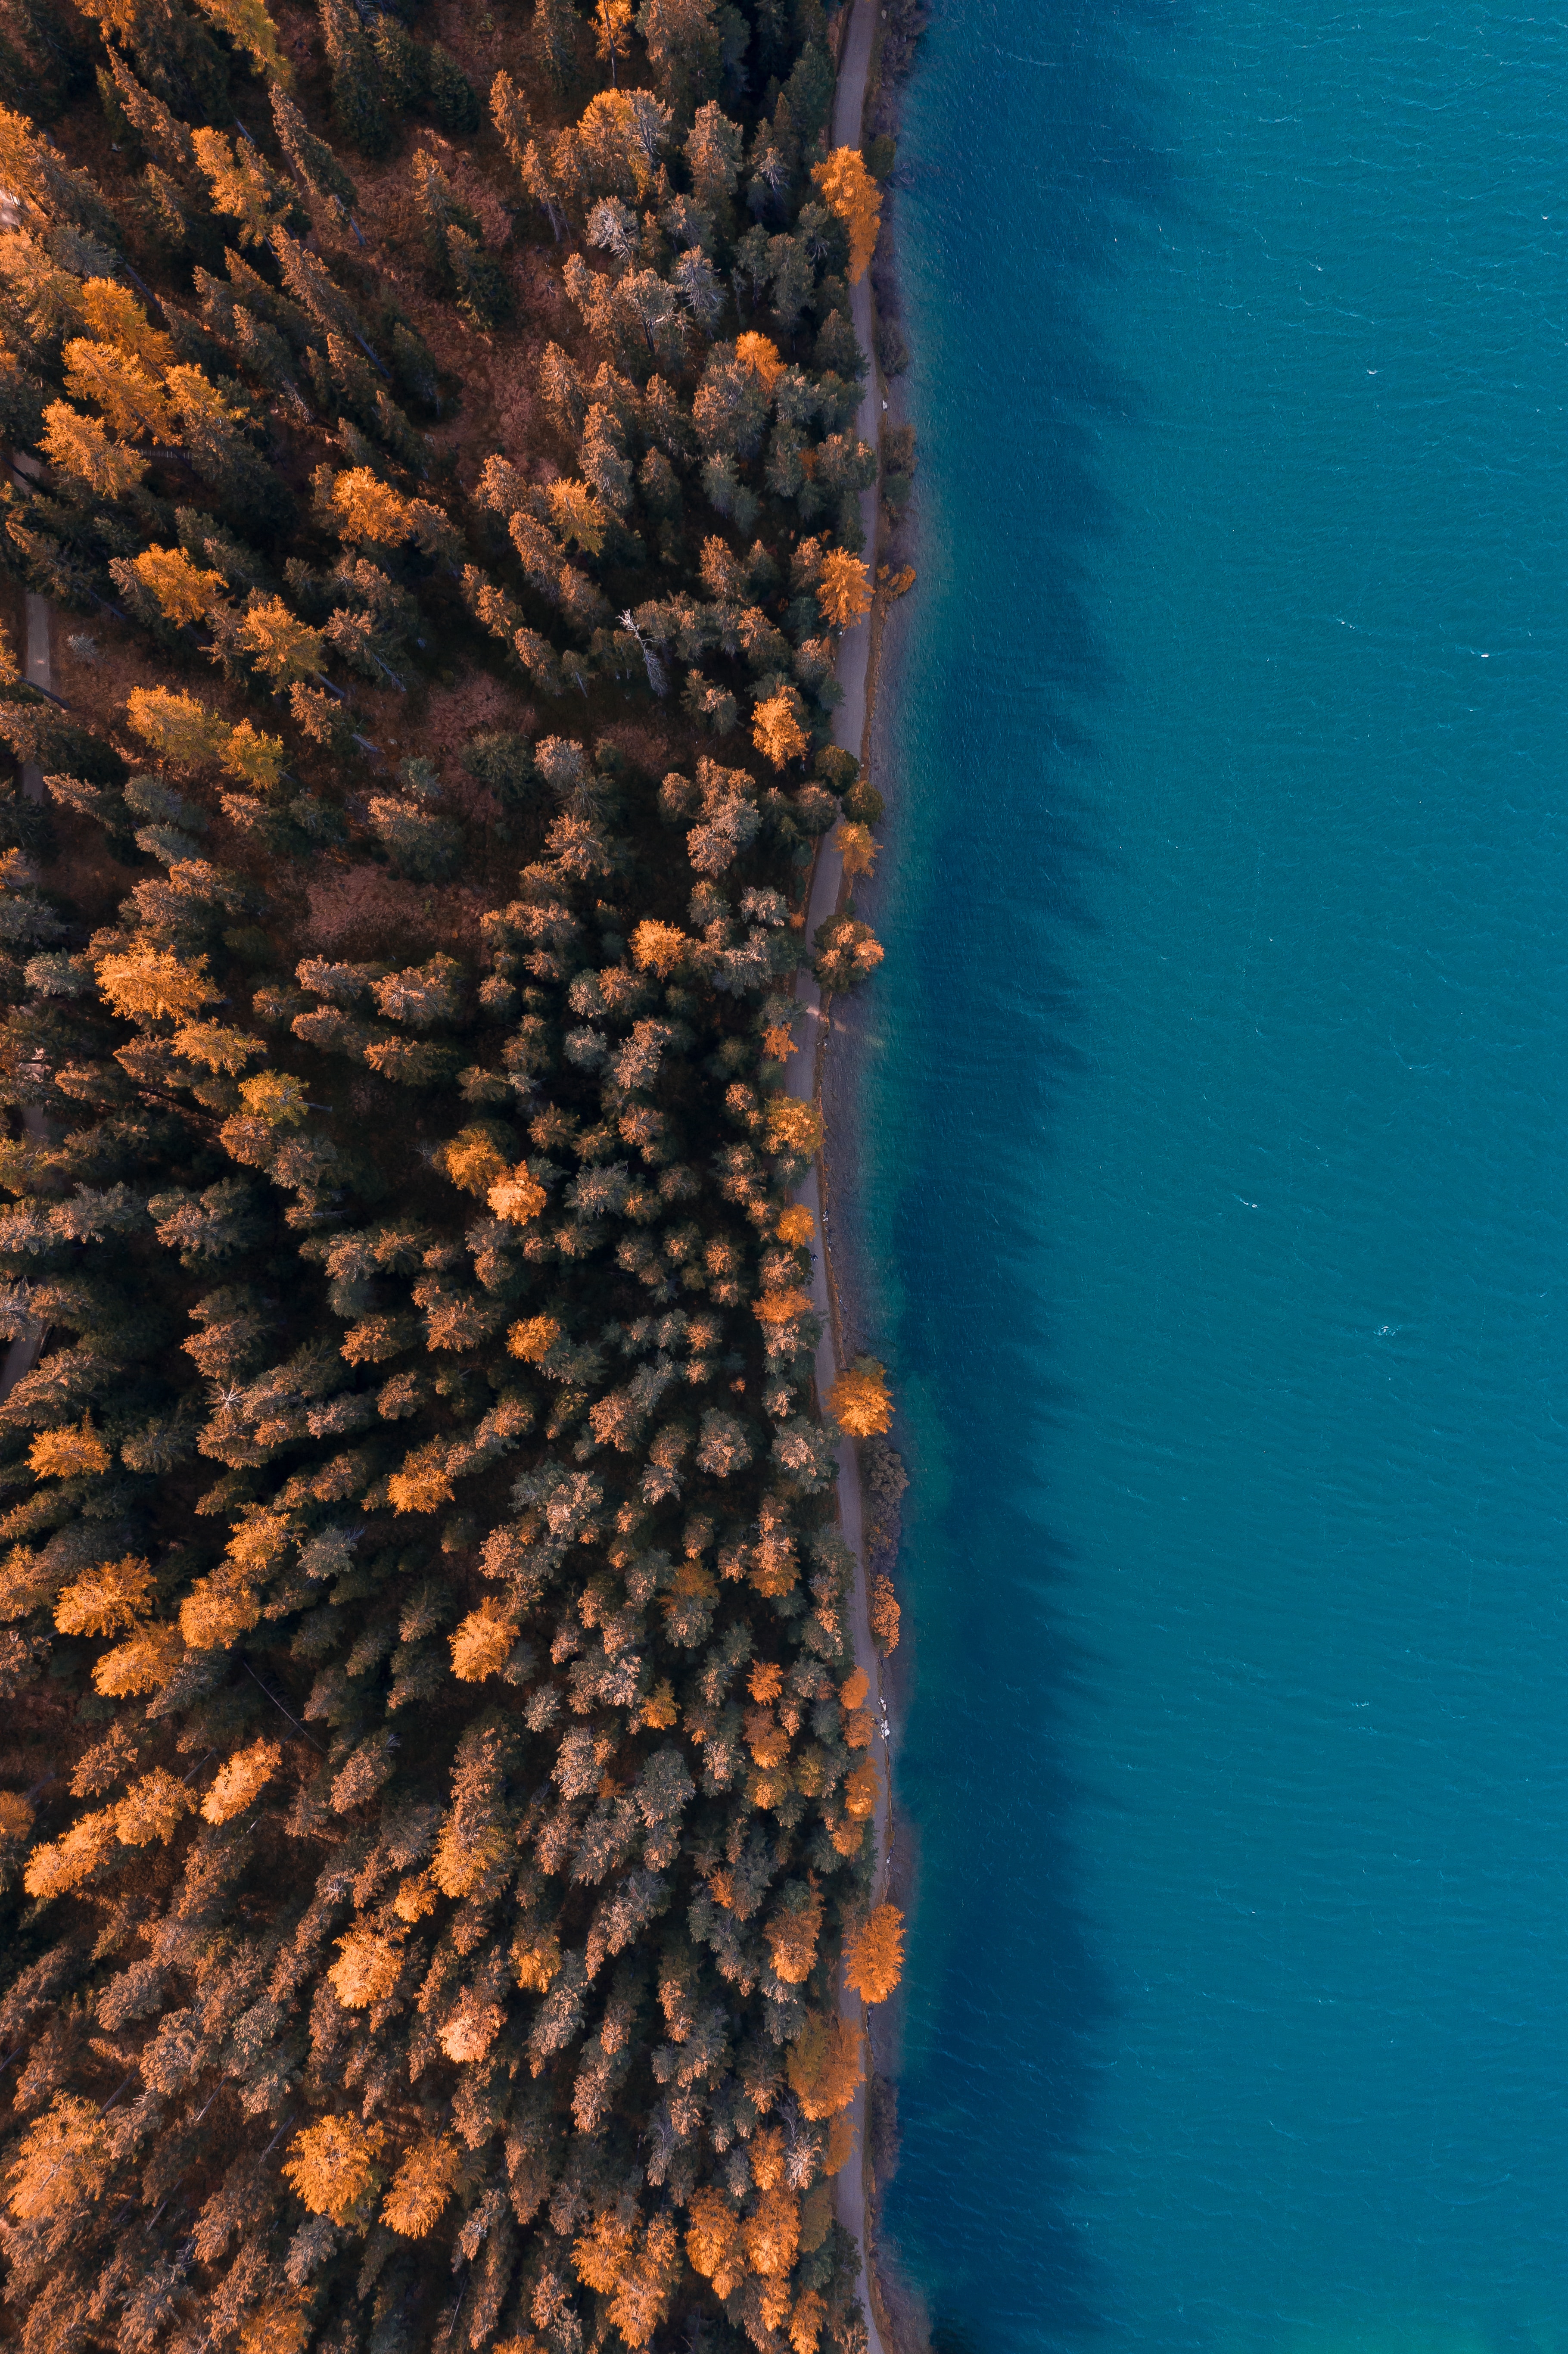 view from above, water, nature, trees, sea, coast, forest High Definition image